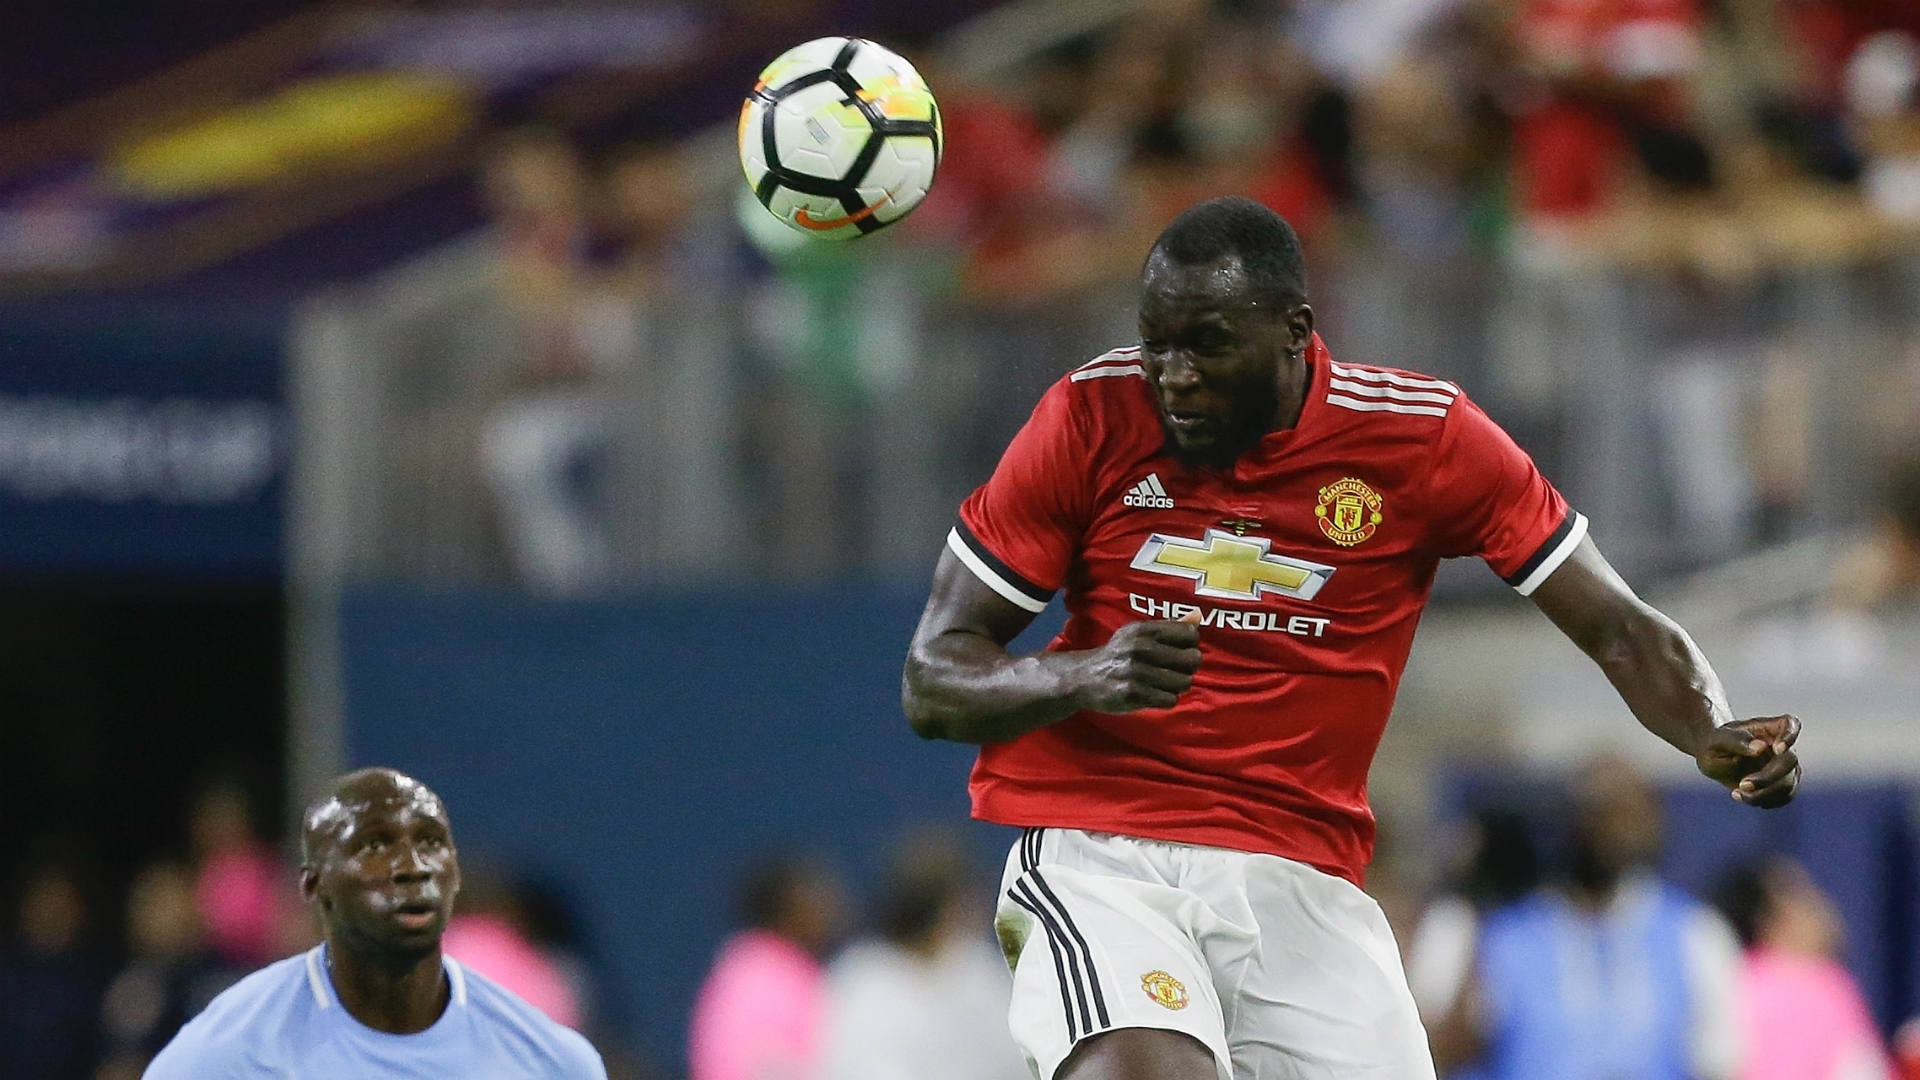 Manchester United's new striker Romelu Lukaku revealed he wants to model himself after Cristiano Ronaldo's performances at Old Trafford, but remains humble about his abilities. 